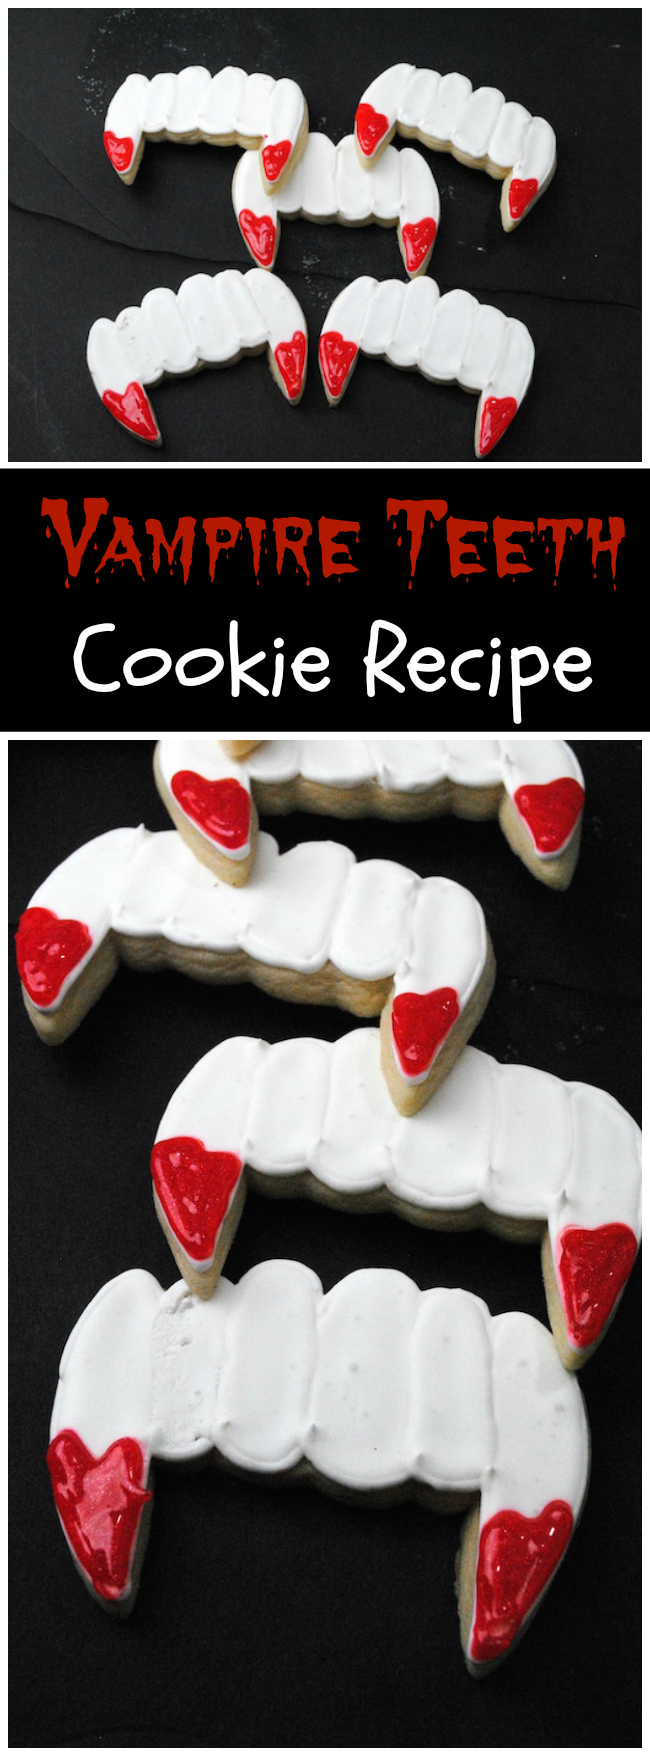 Halloween is closing in and will be here in a couple weeks. Here is a Vampire Teeth Cookie recipe that is great for parties or Trunk or Treats!